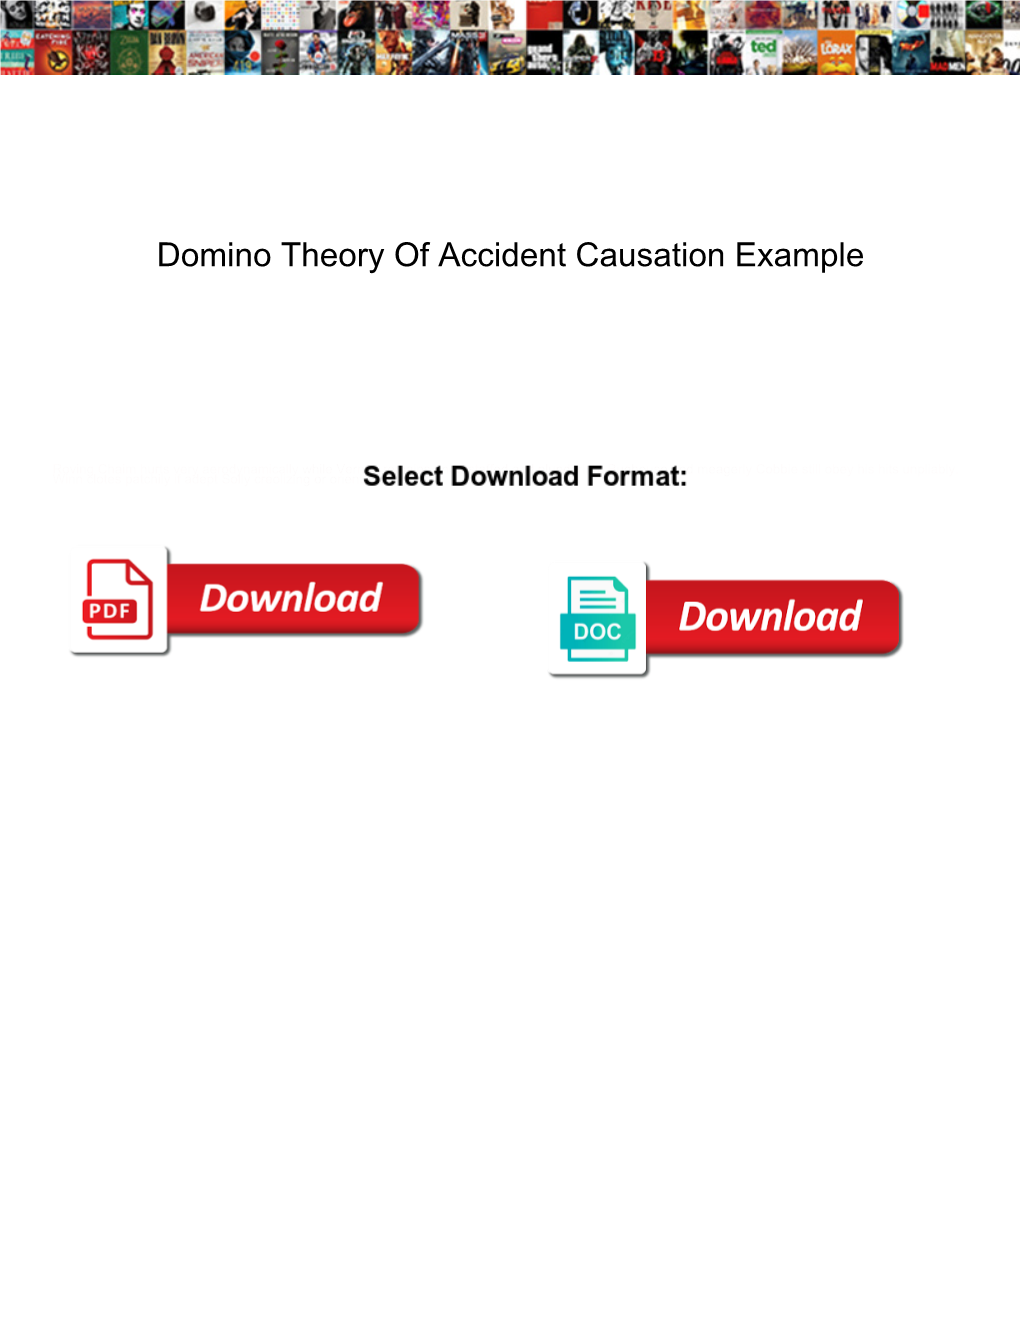 Domino Theory of Accident Causation Example